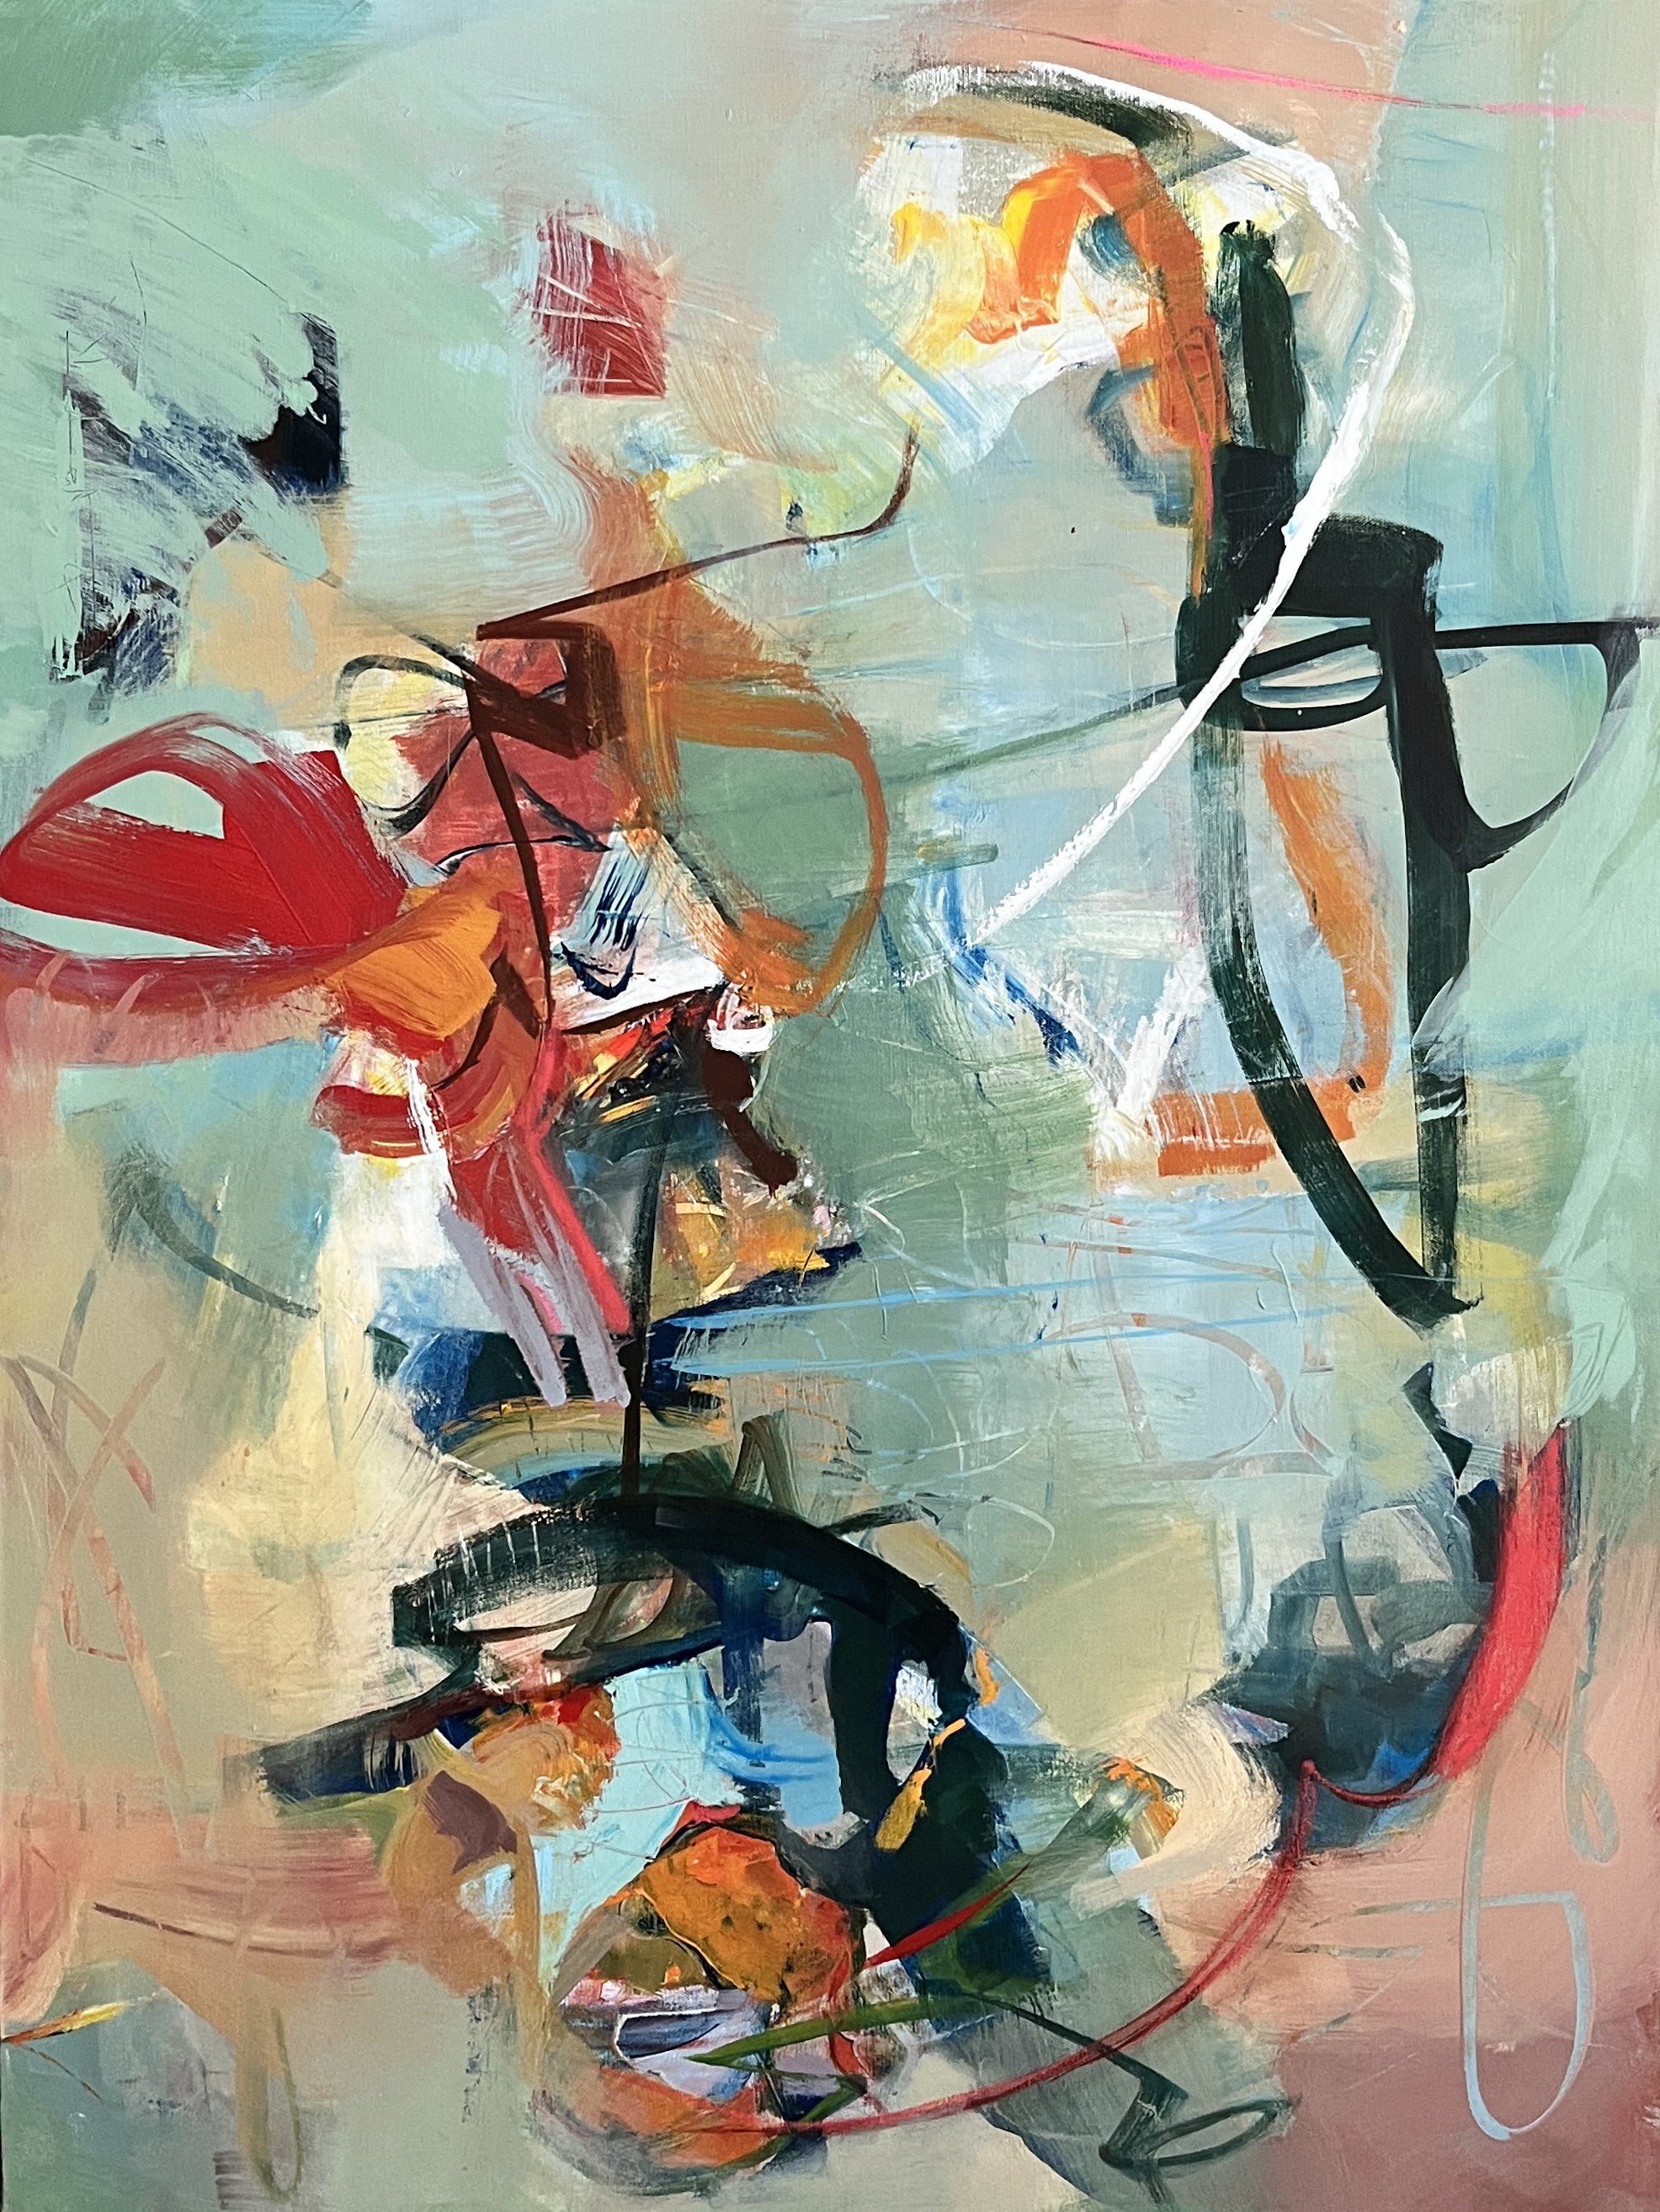 More Or Less, 40" x 30" by Pam Austin